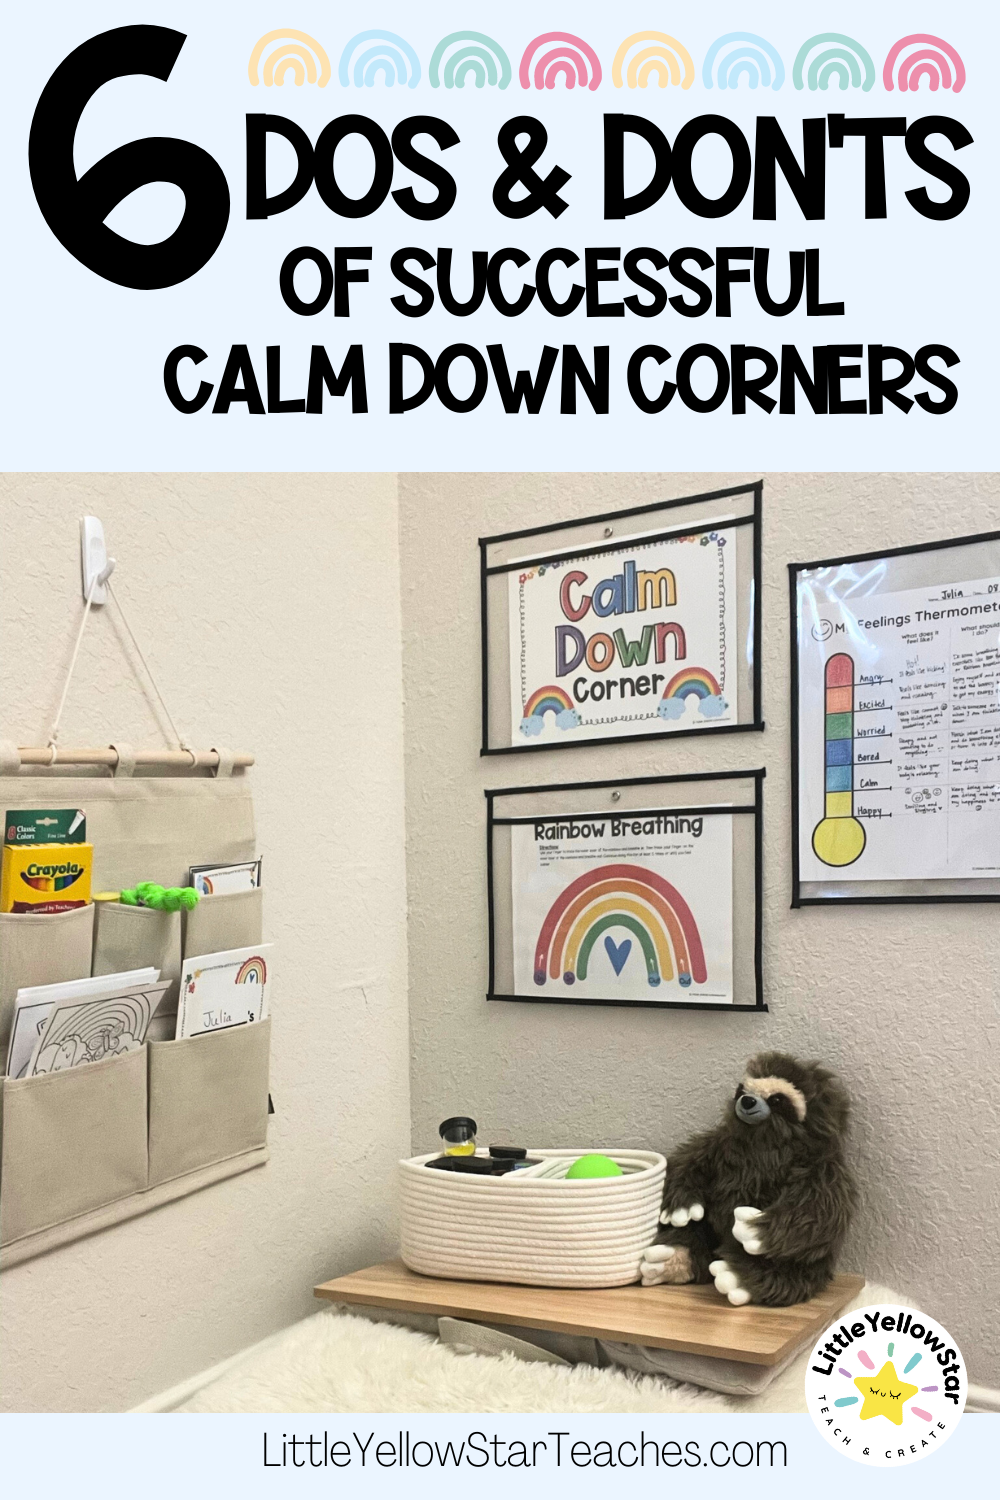 6 Dos and Don'ts of Successful Calm Down Corners